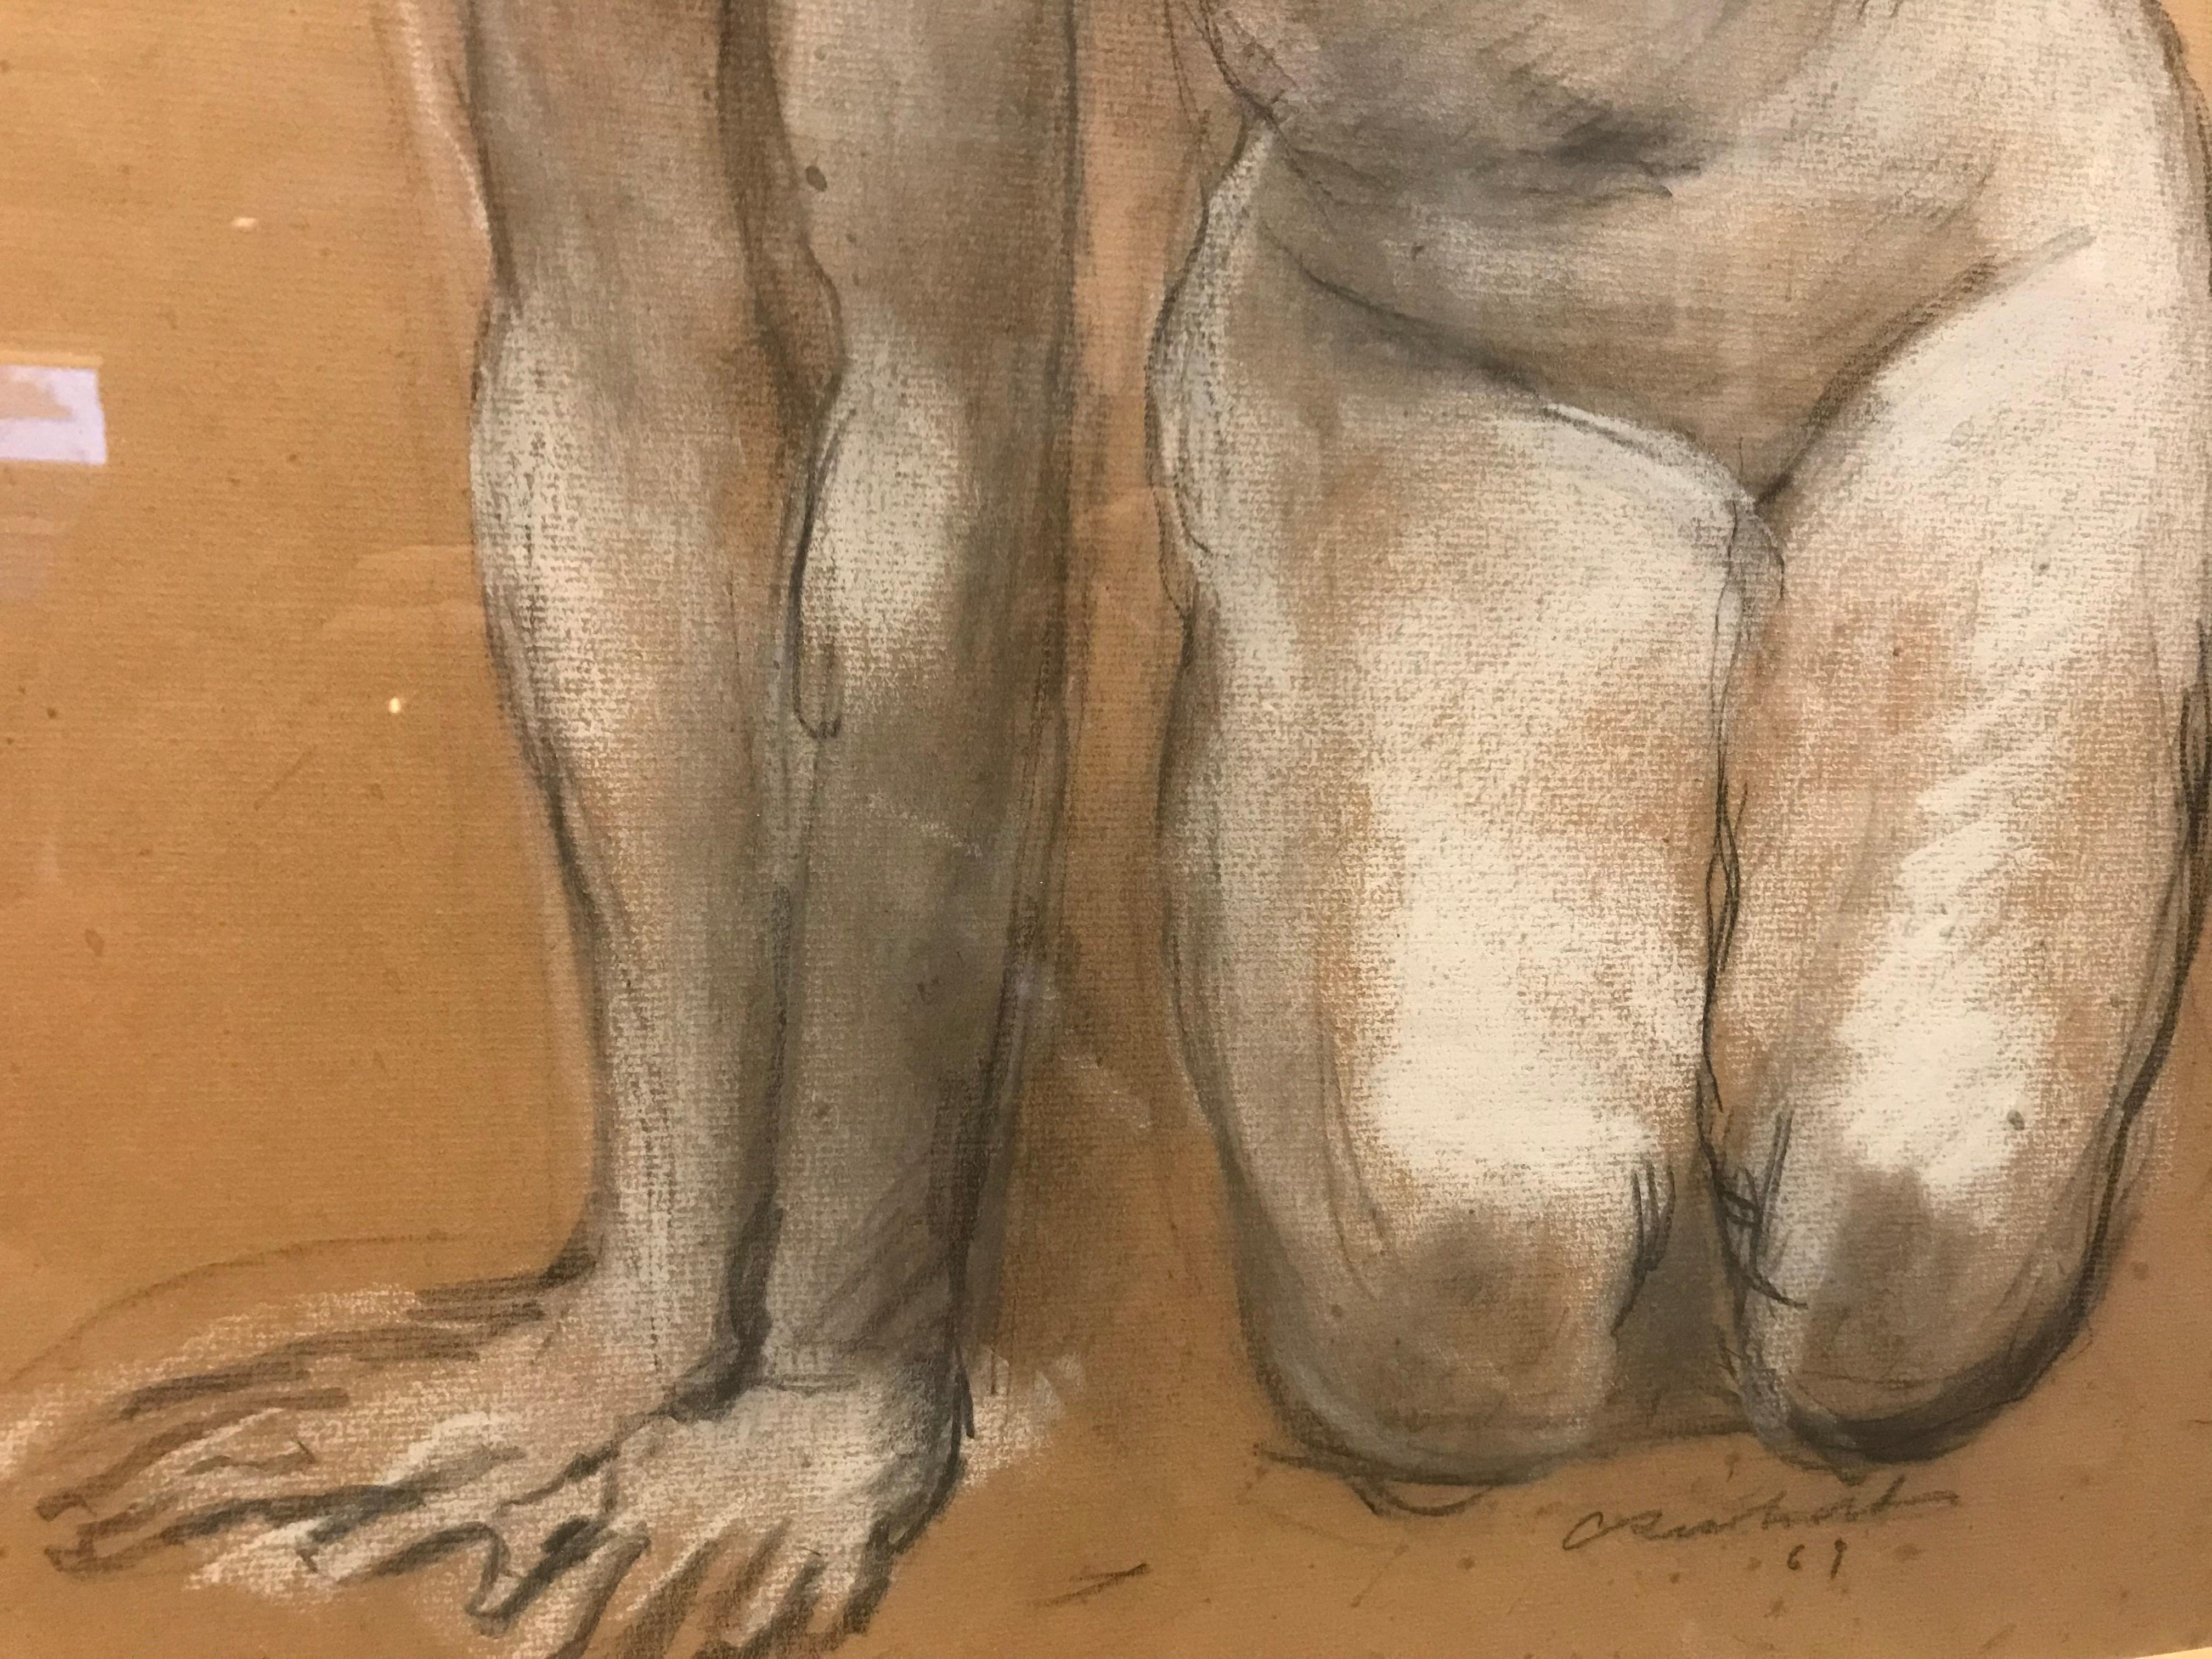 A truly lovely nude by noted 20th-century New Orleans artist and extraordinary draftsman Charles Richards, whose work does not come up for sale often enough here in New Orleans. Sorry for the angles and glass reflections in the photos, but I wanted